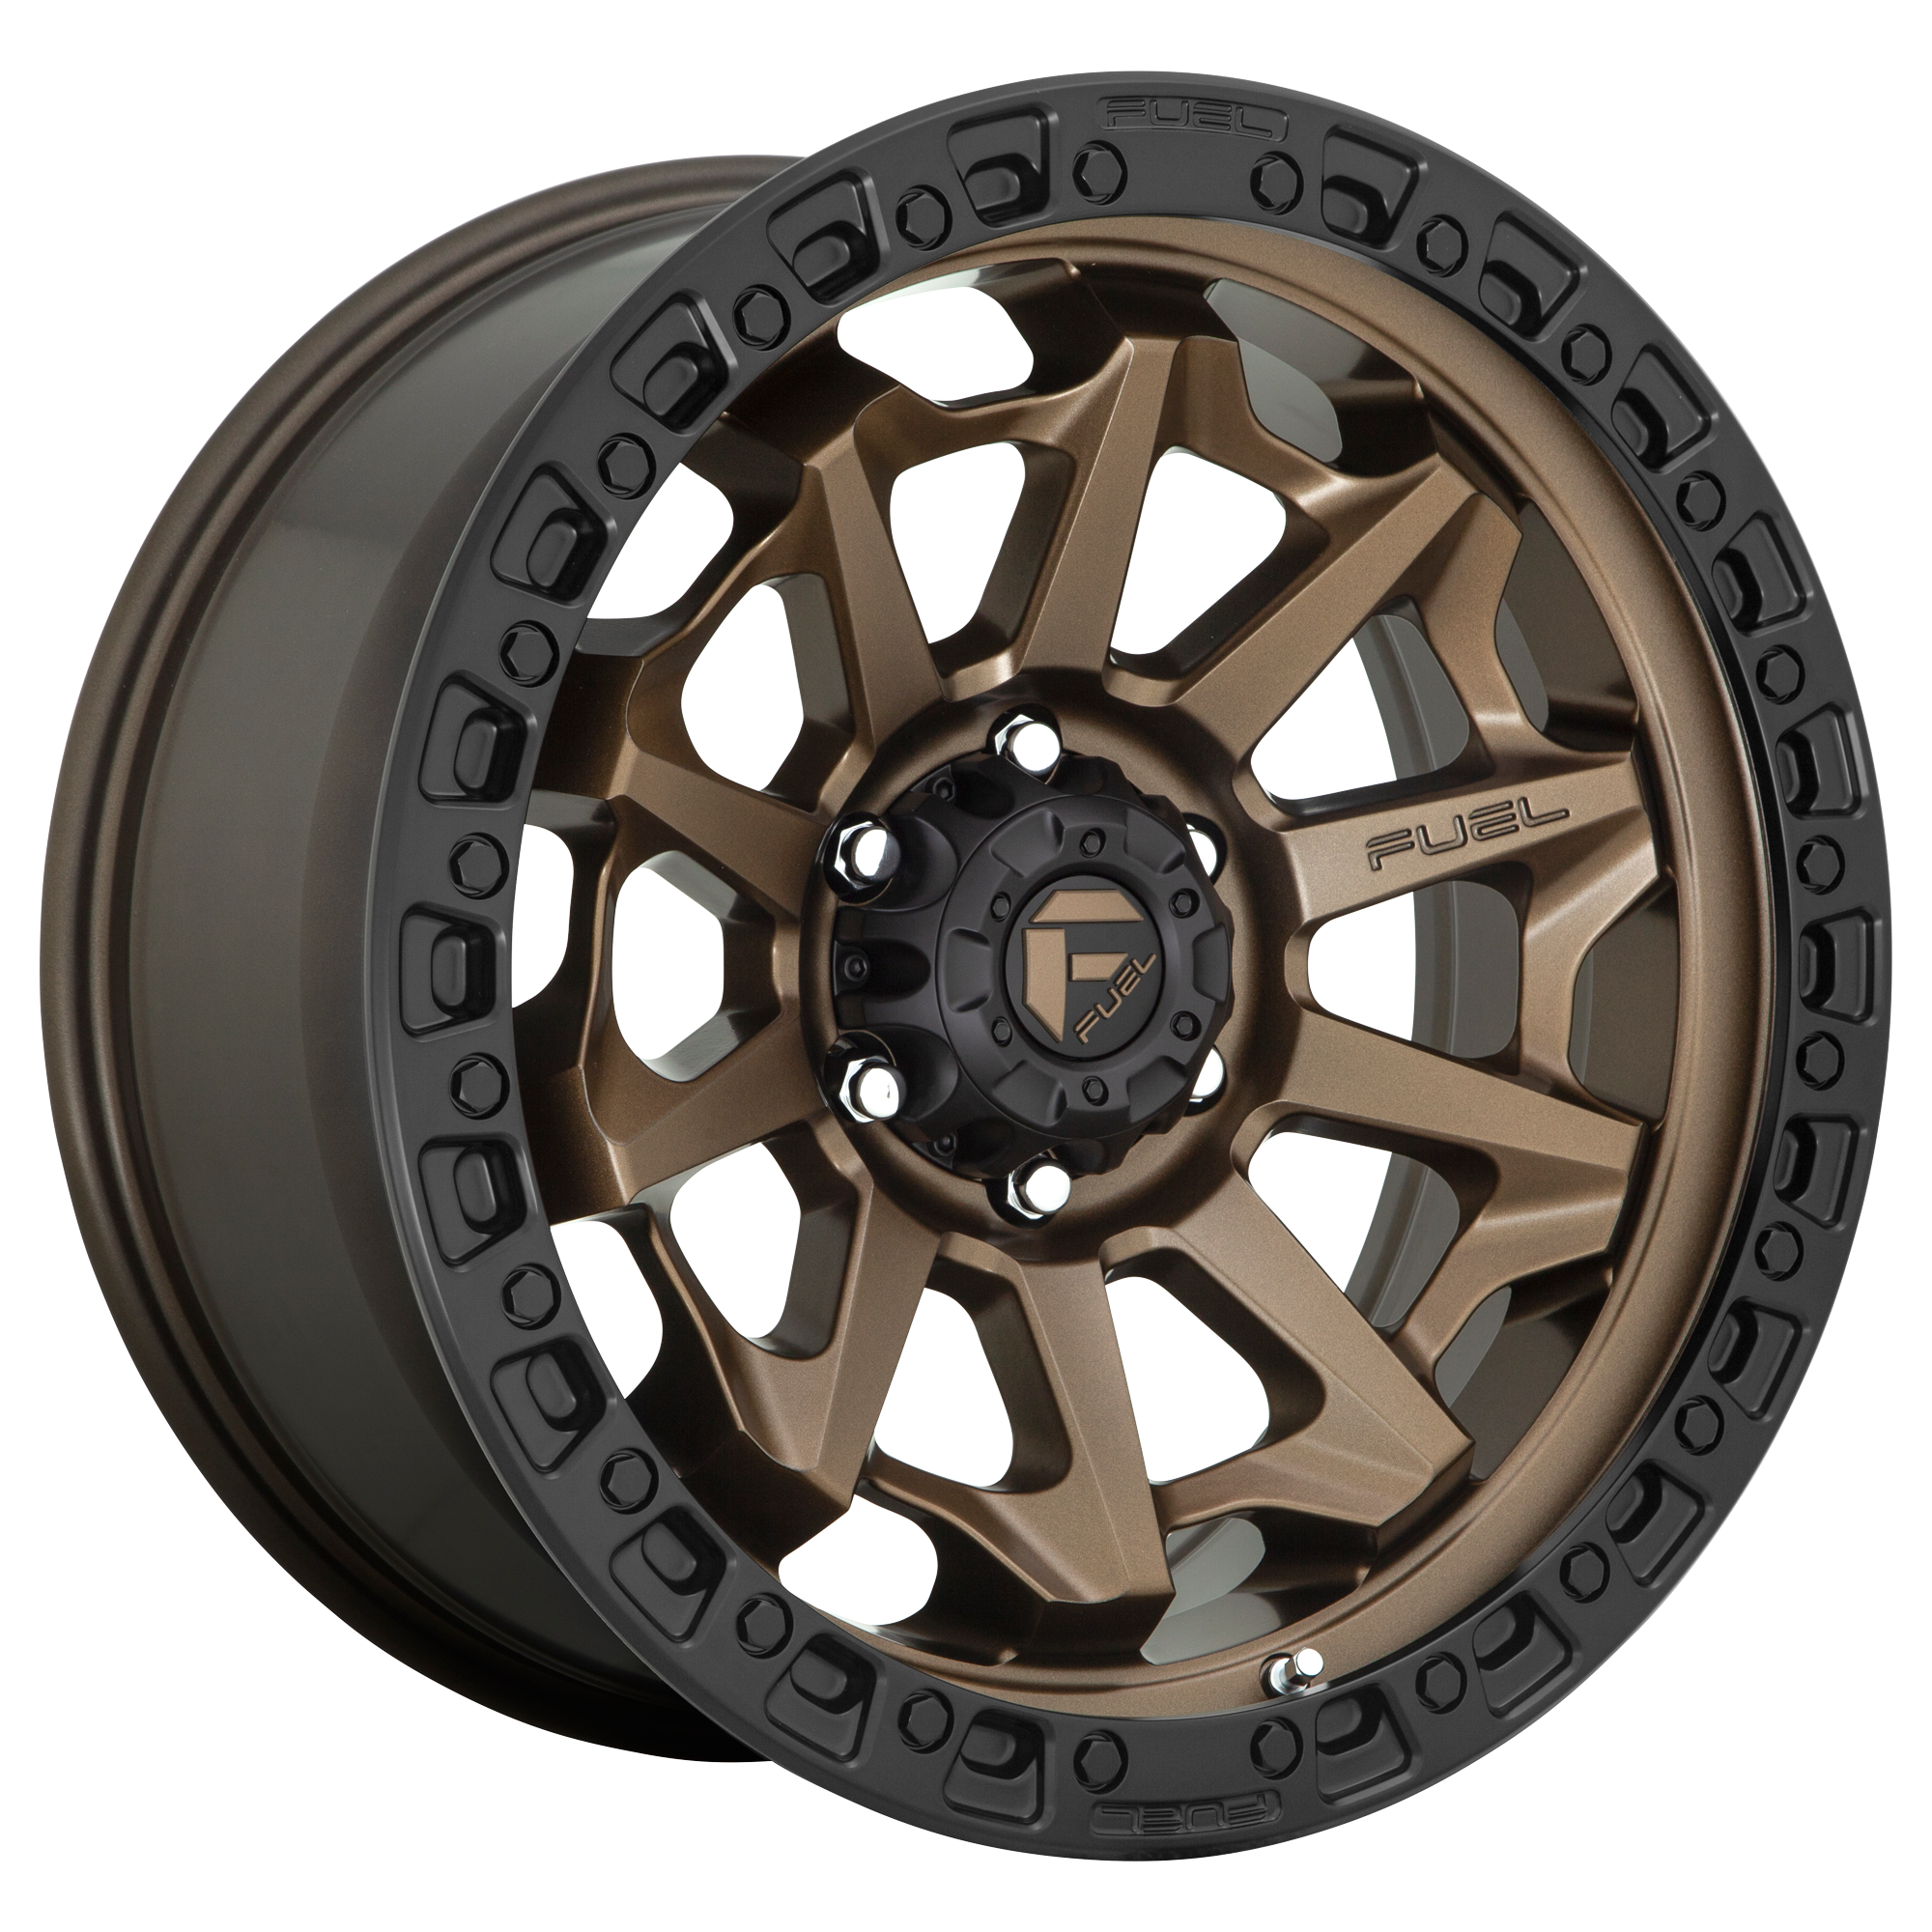 COVERT 20x9 6x135.00 MATTE BRONZE BLACK BEAD RING (20 mm) - Tires and Engine Performance